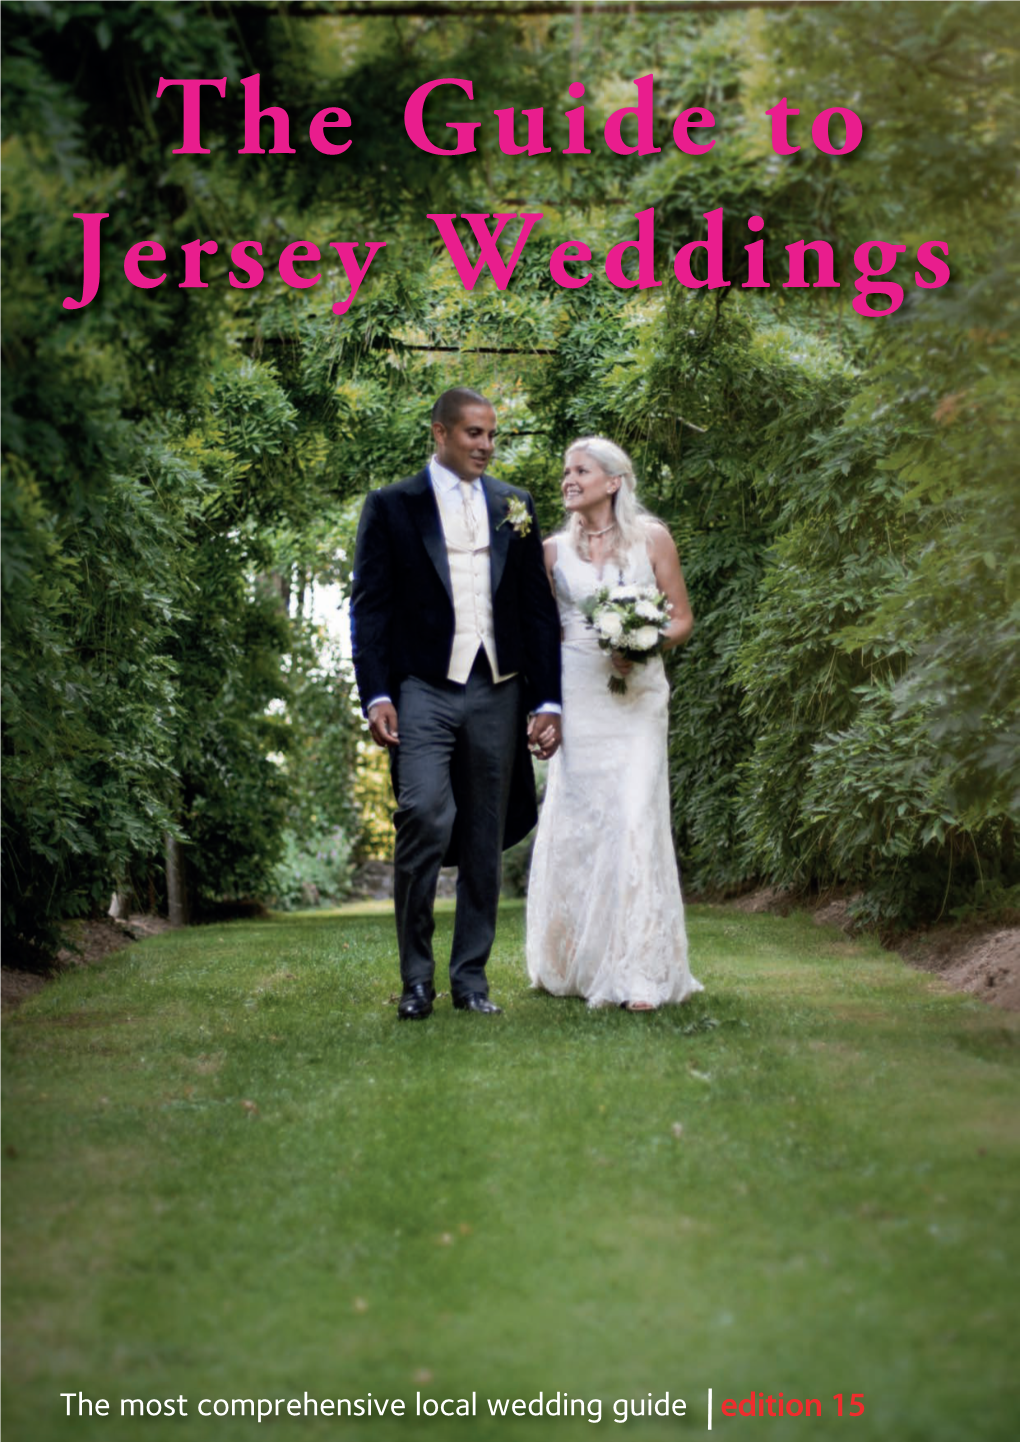 The Guide to Jersey Weddings